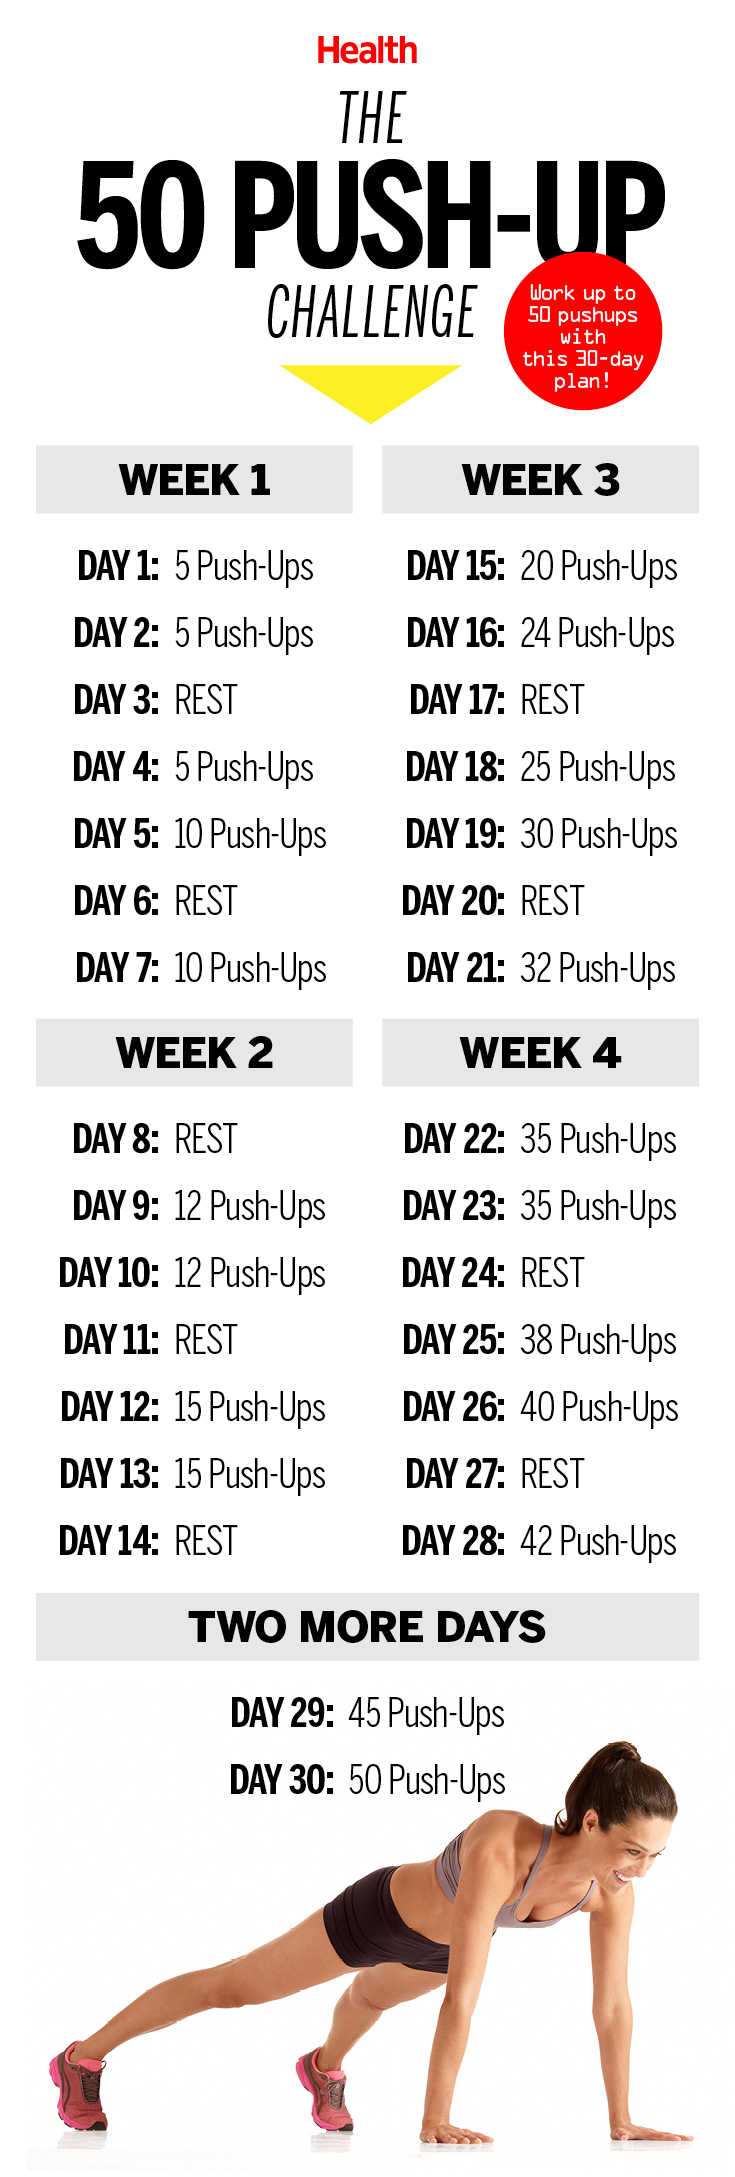 This 50 Push-Up Challenge Will Transform Your Body in 30 Days - This 50 Push-Up Challenge Will Transform Your Body in 30 Days -   11 fitness Challenge 30 day ideas